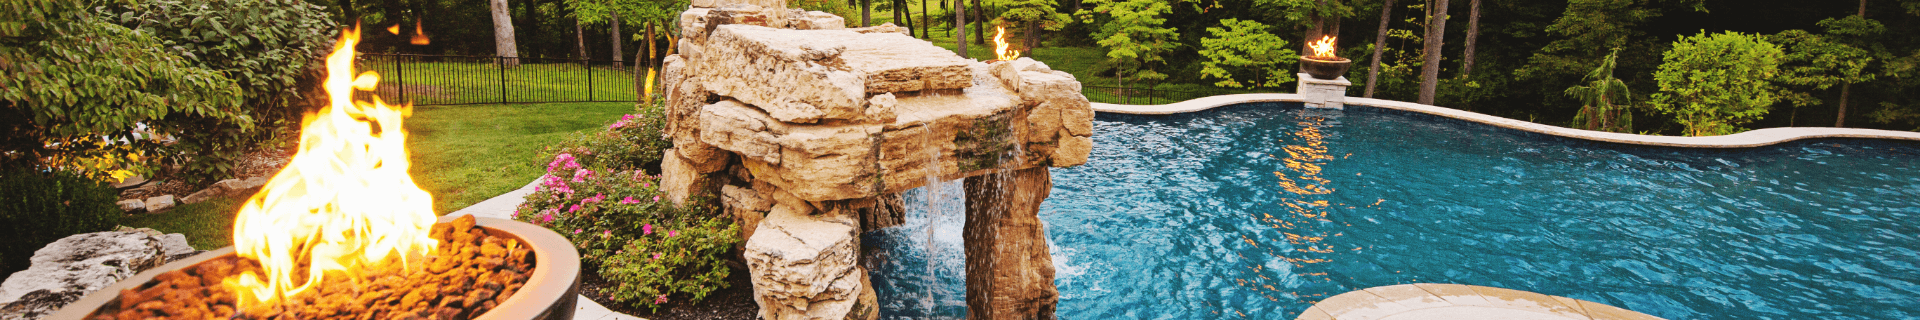 stone waterfall and firepit features at one end of an ornately landscaped pool